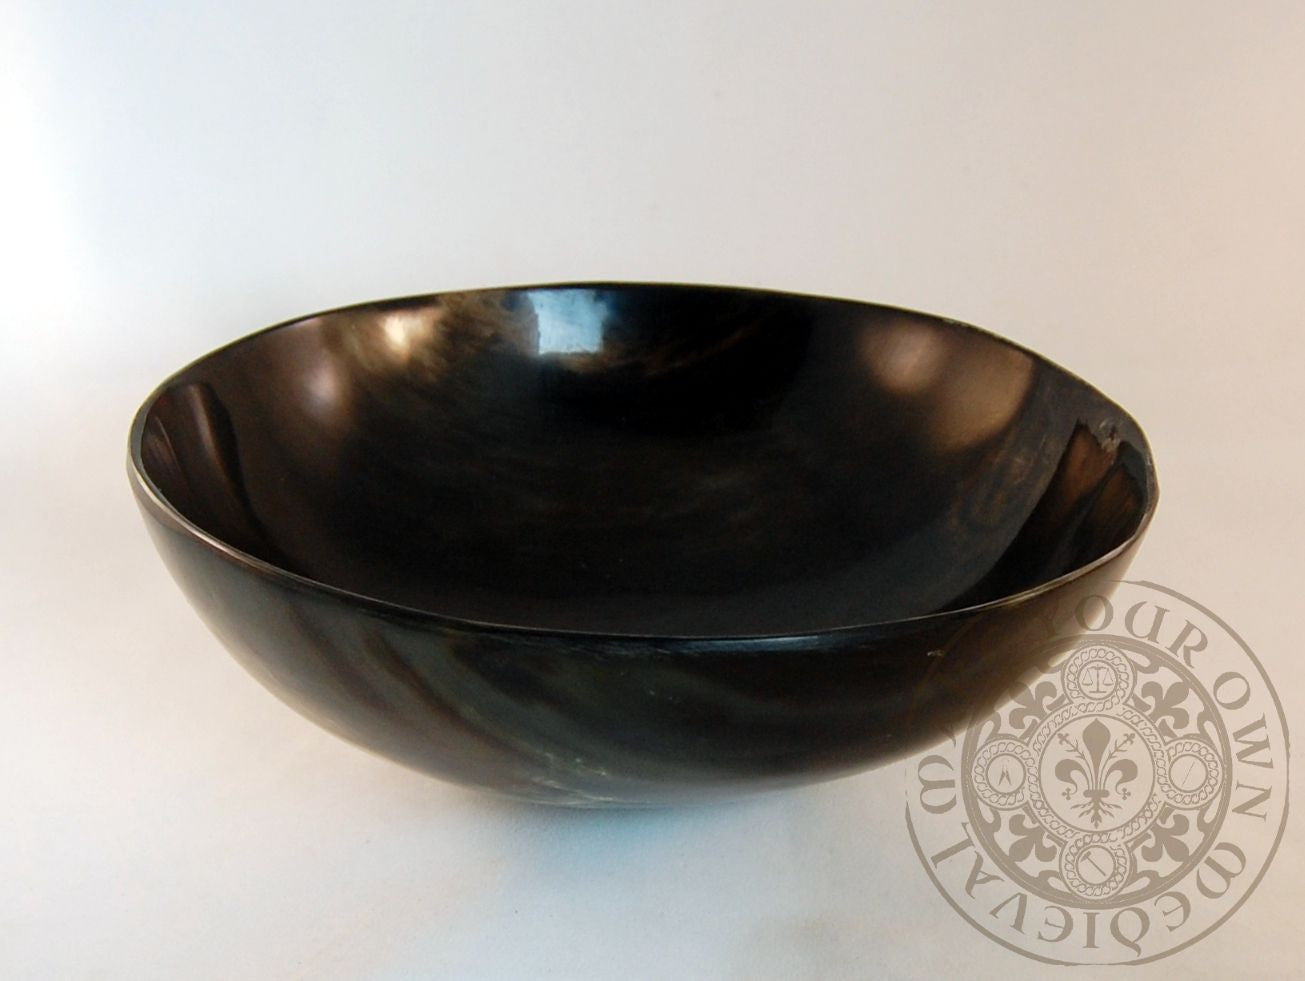 Horn bowl for Viking, Dark Ages and Medieval reenactment, LARP and living history